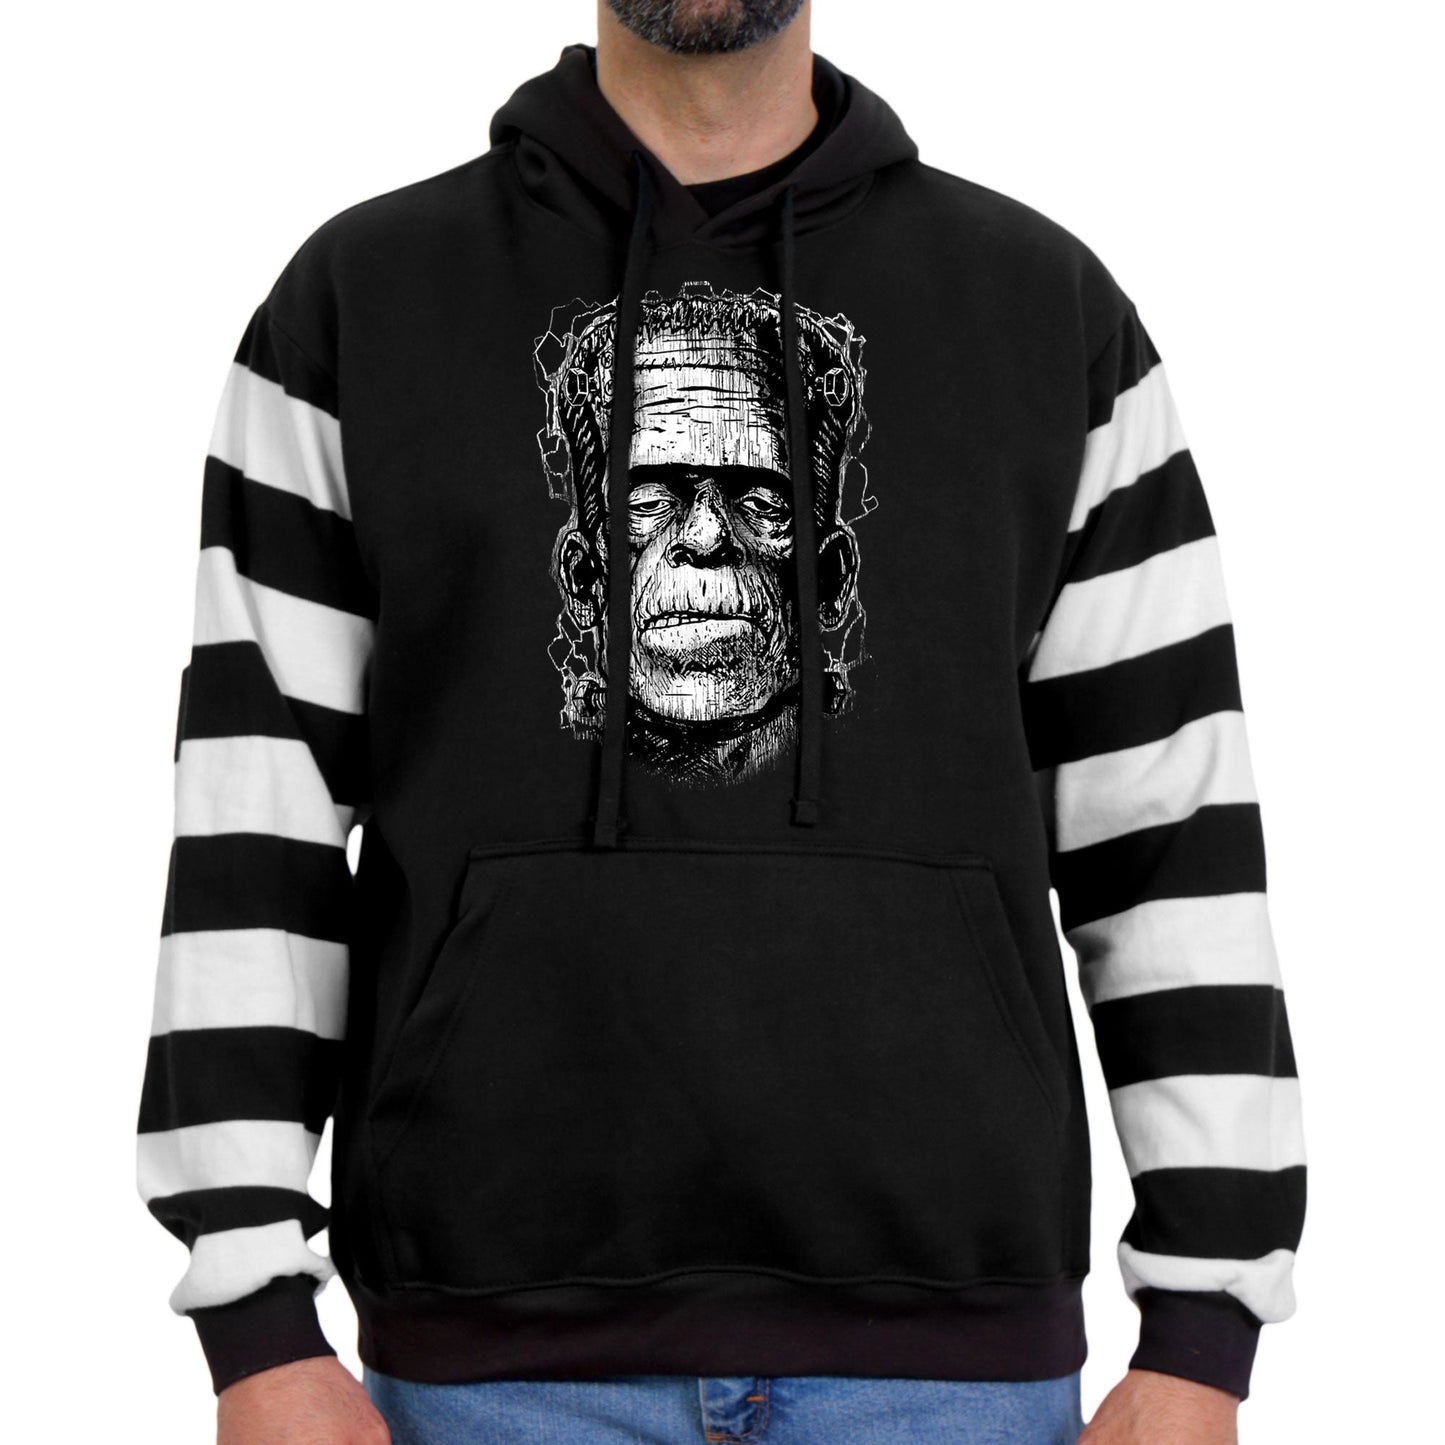 Men's Black and White 'Frankie' Hooded Pullover Sweatshirt with Knit Strip Sleeves